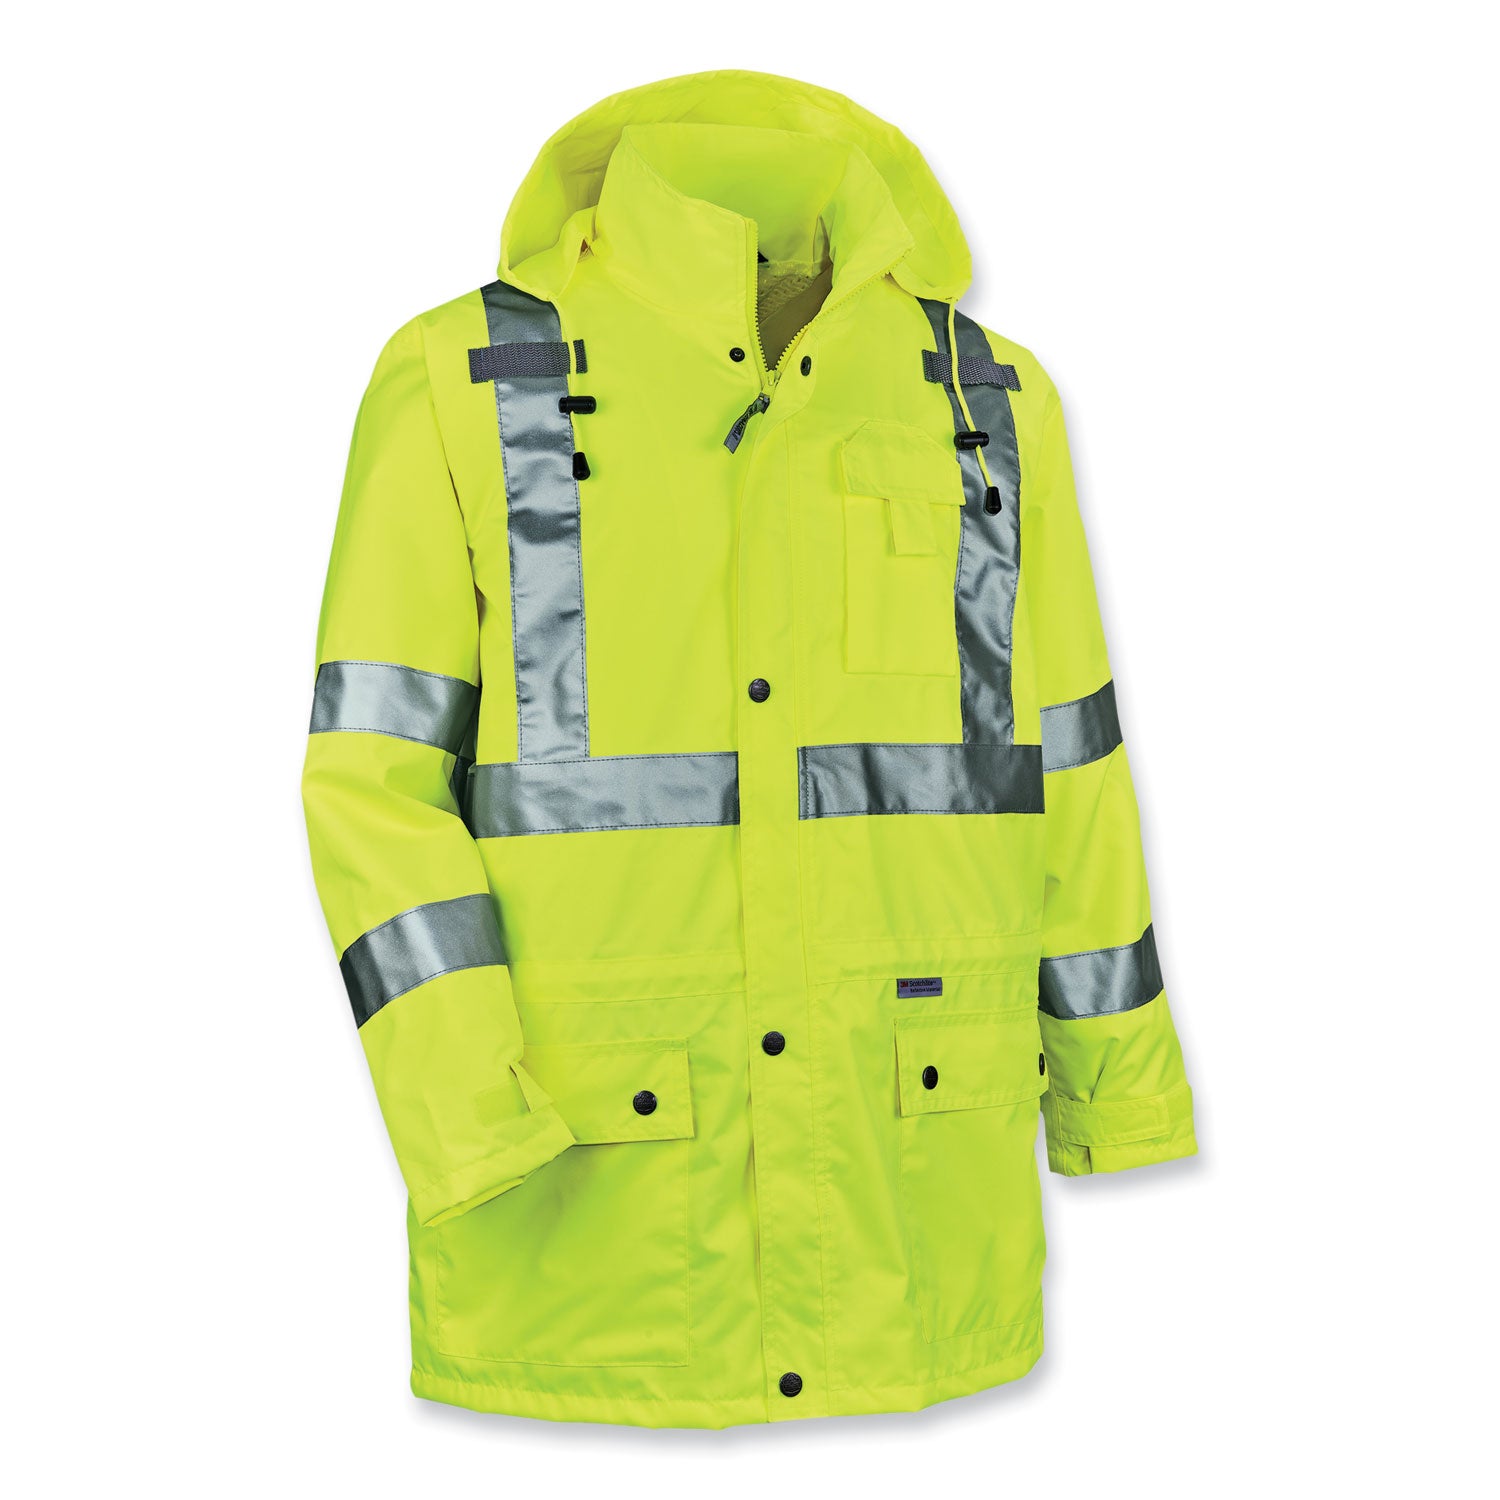 glowear-8365-class-3-hi-vis-rain-jacket-polyester-2x-large-lime-ships-in-1-3-business-days_ego24326 - 1